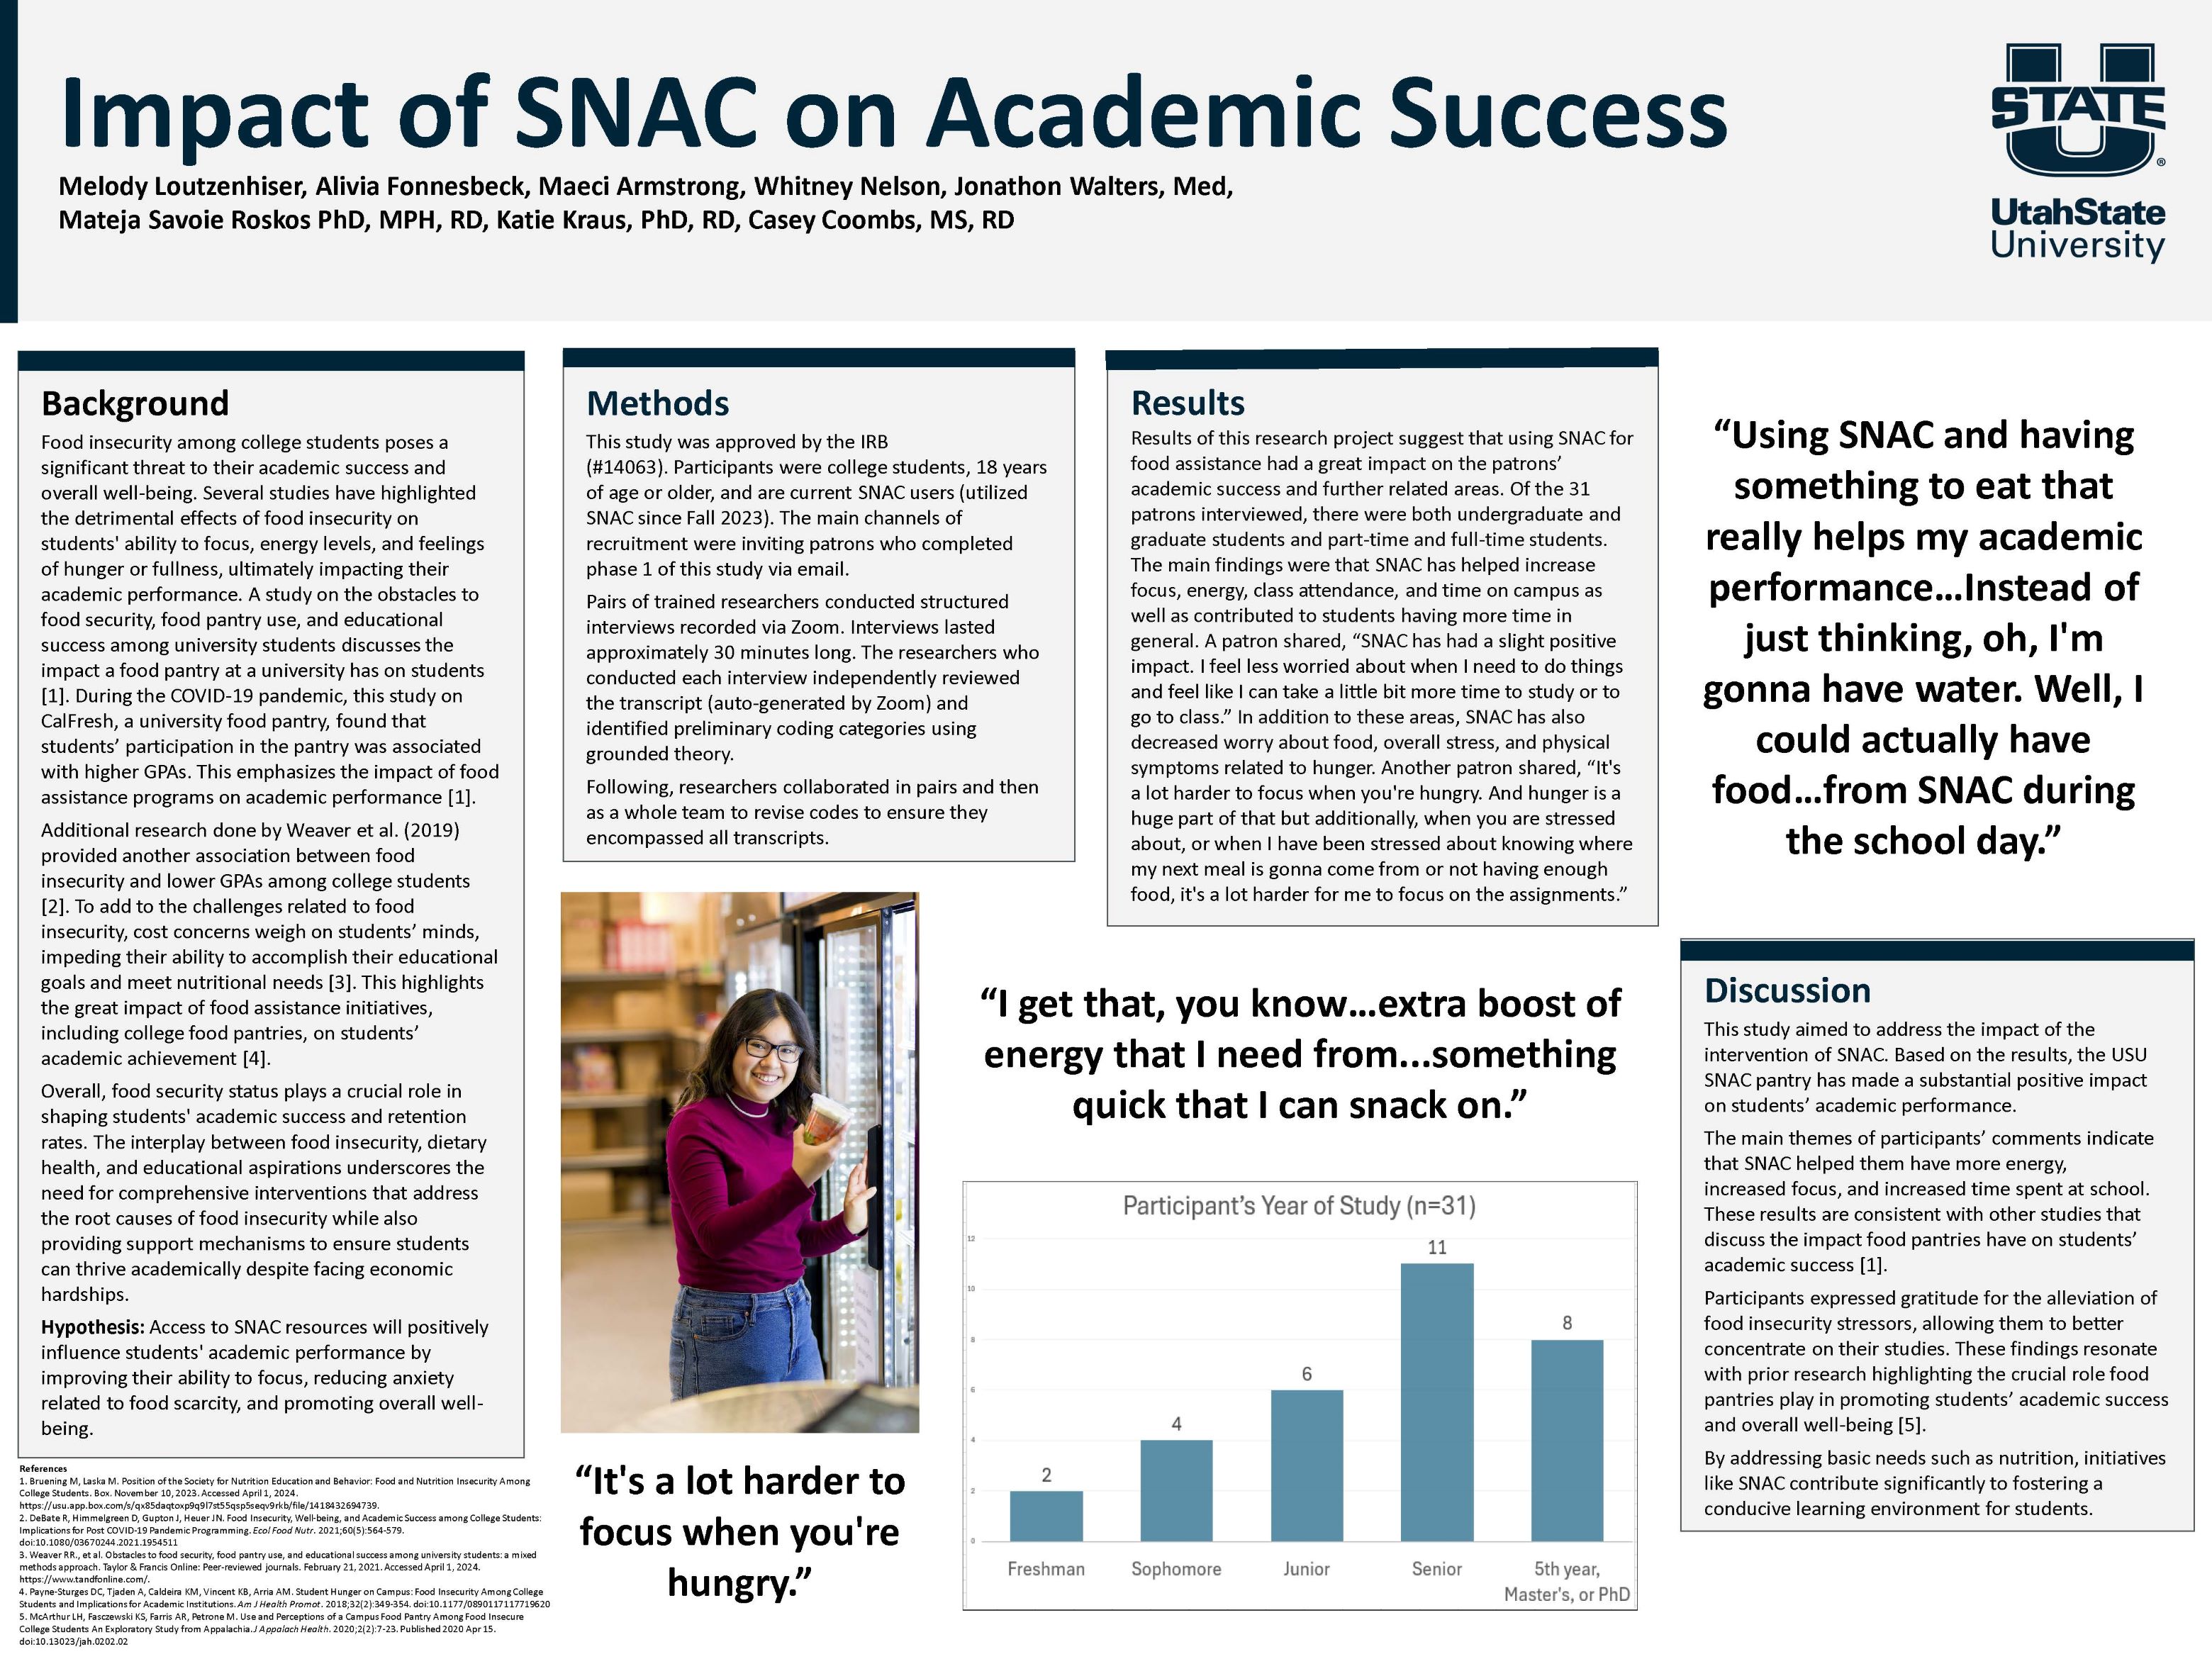 This study aimed to address the impact of the
intervention of SNAC. Based on the results, the USU SNAC pantry has made a substantial positive impact on students’ academic performance.